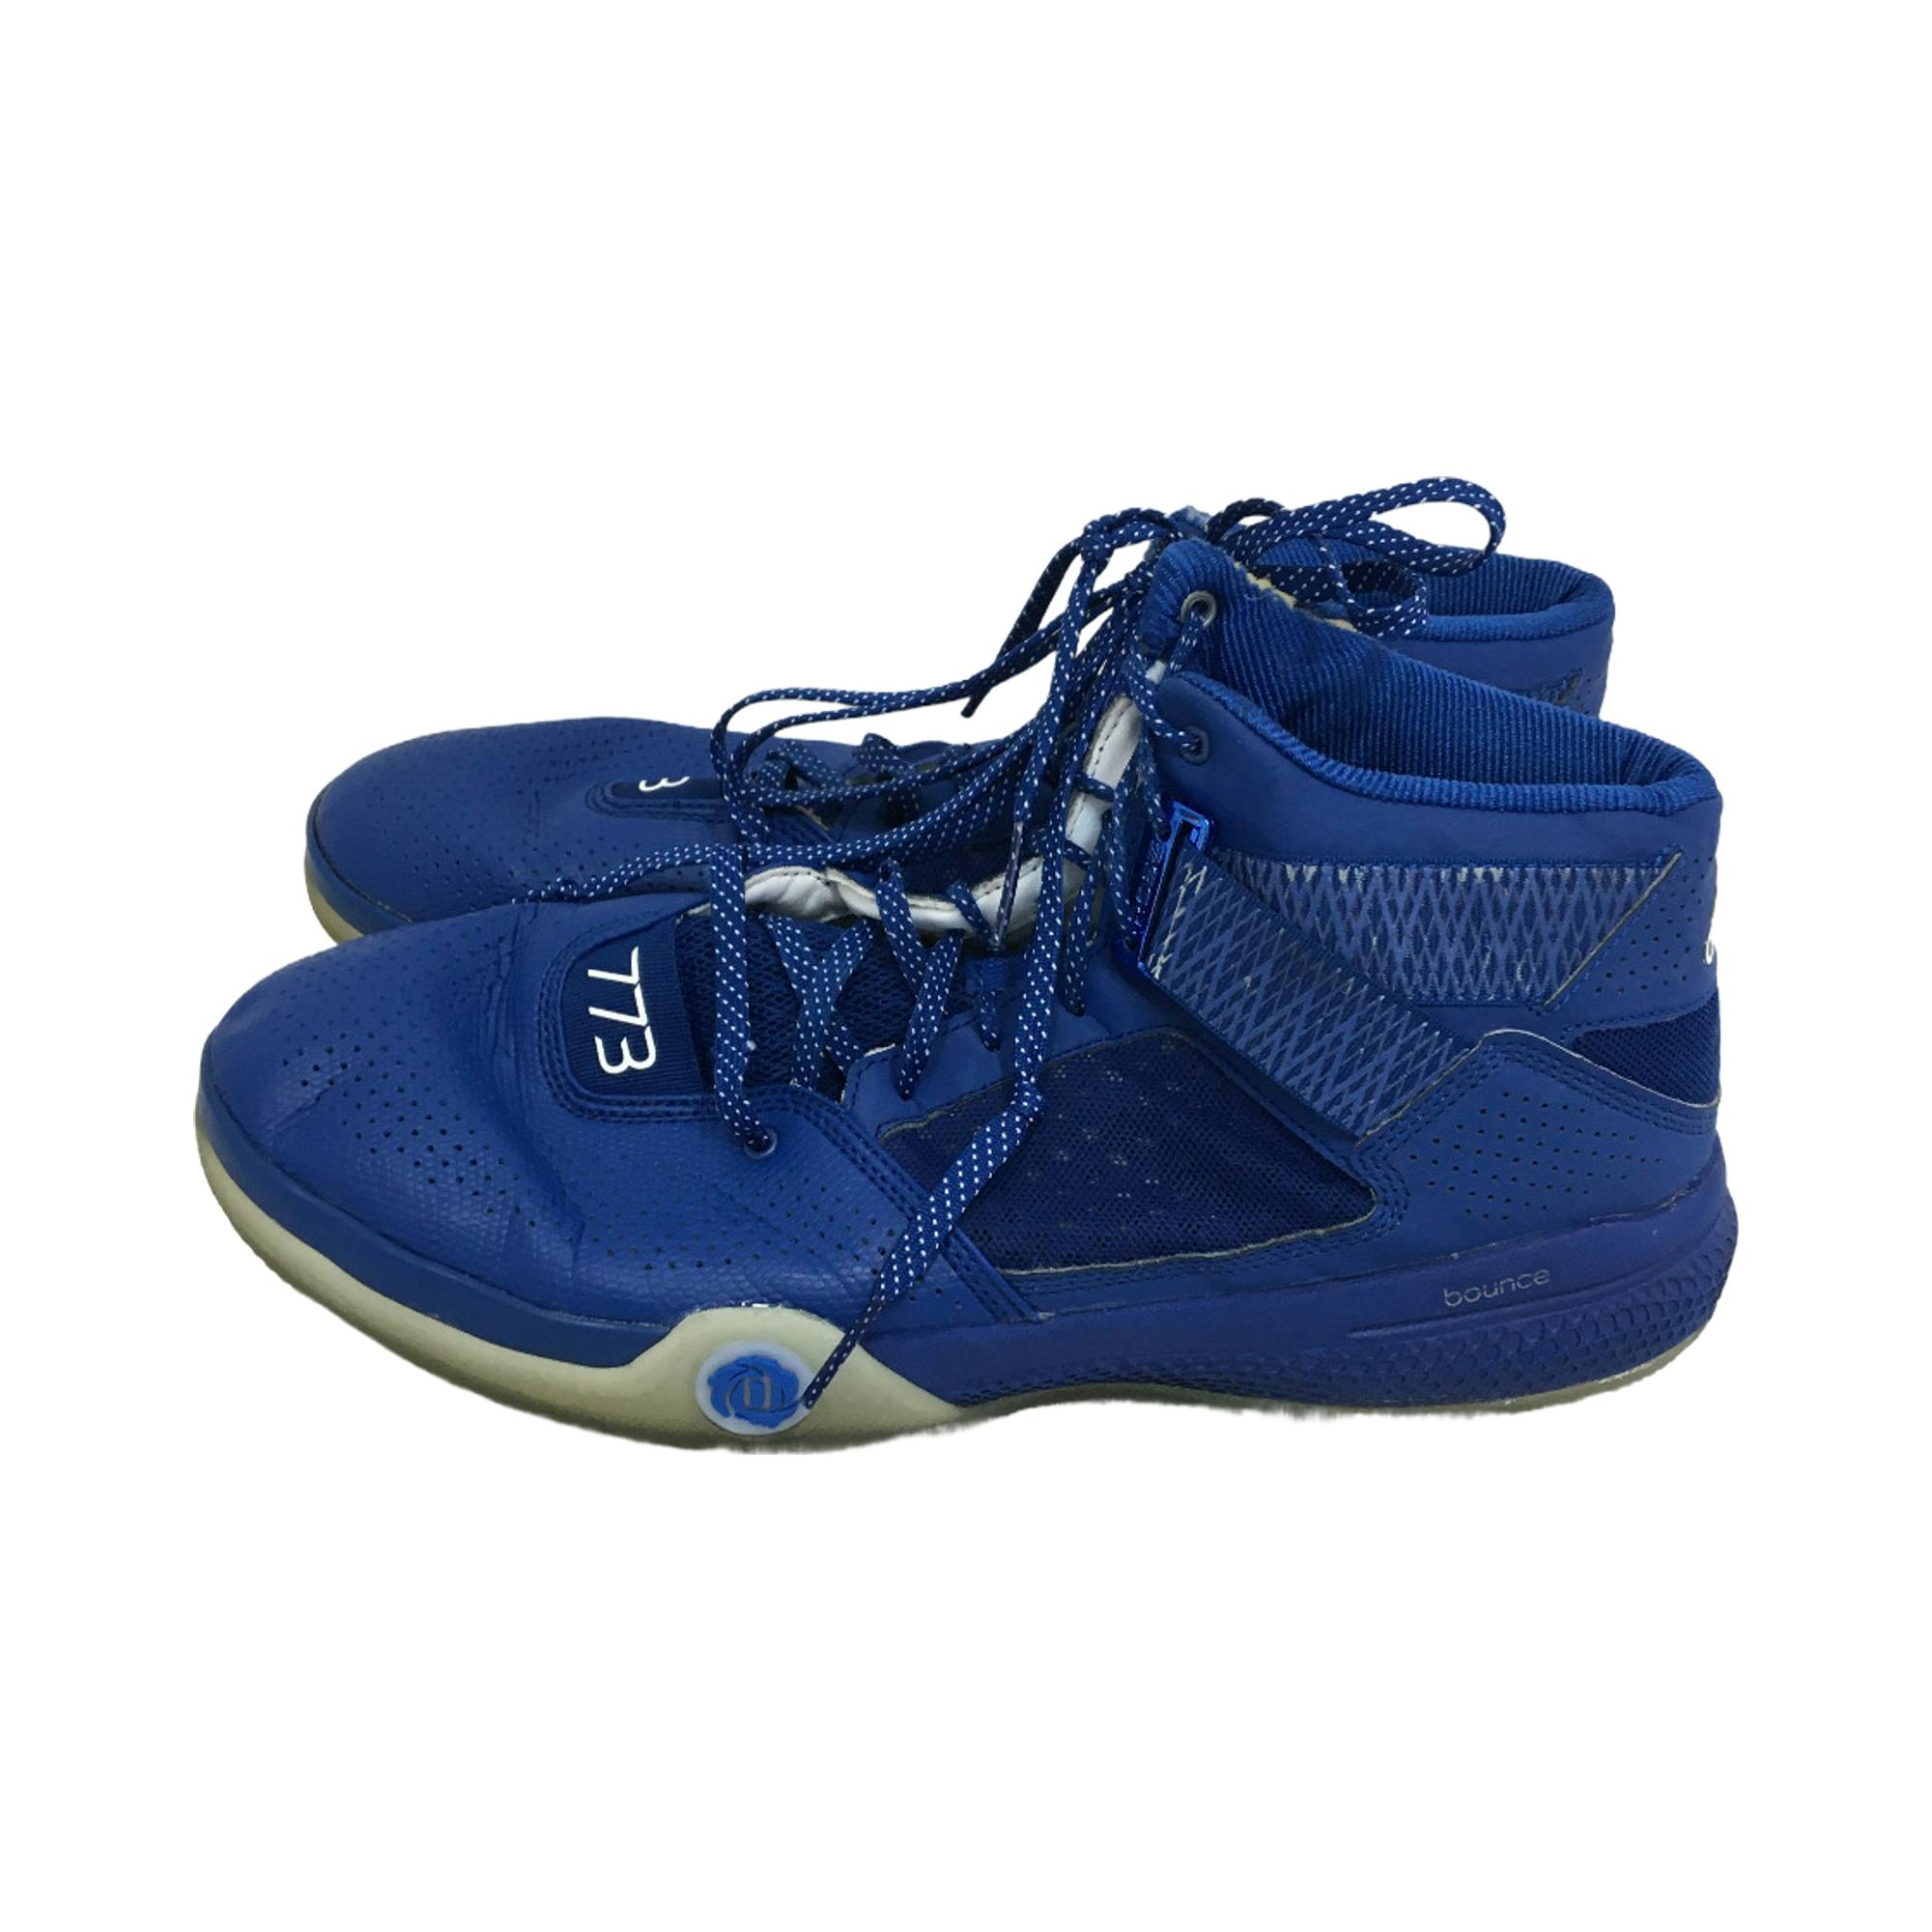 derrick rose shoes blue and white